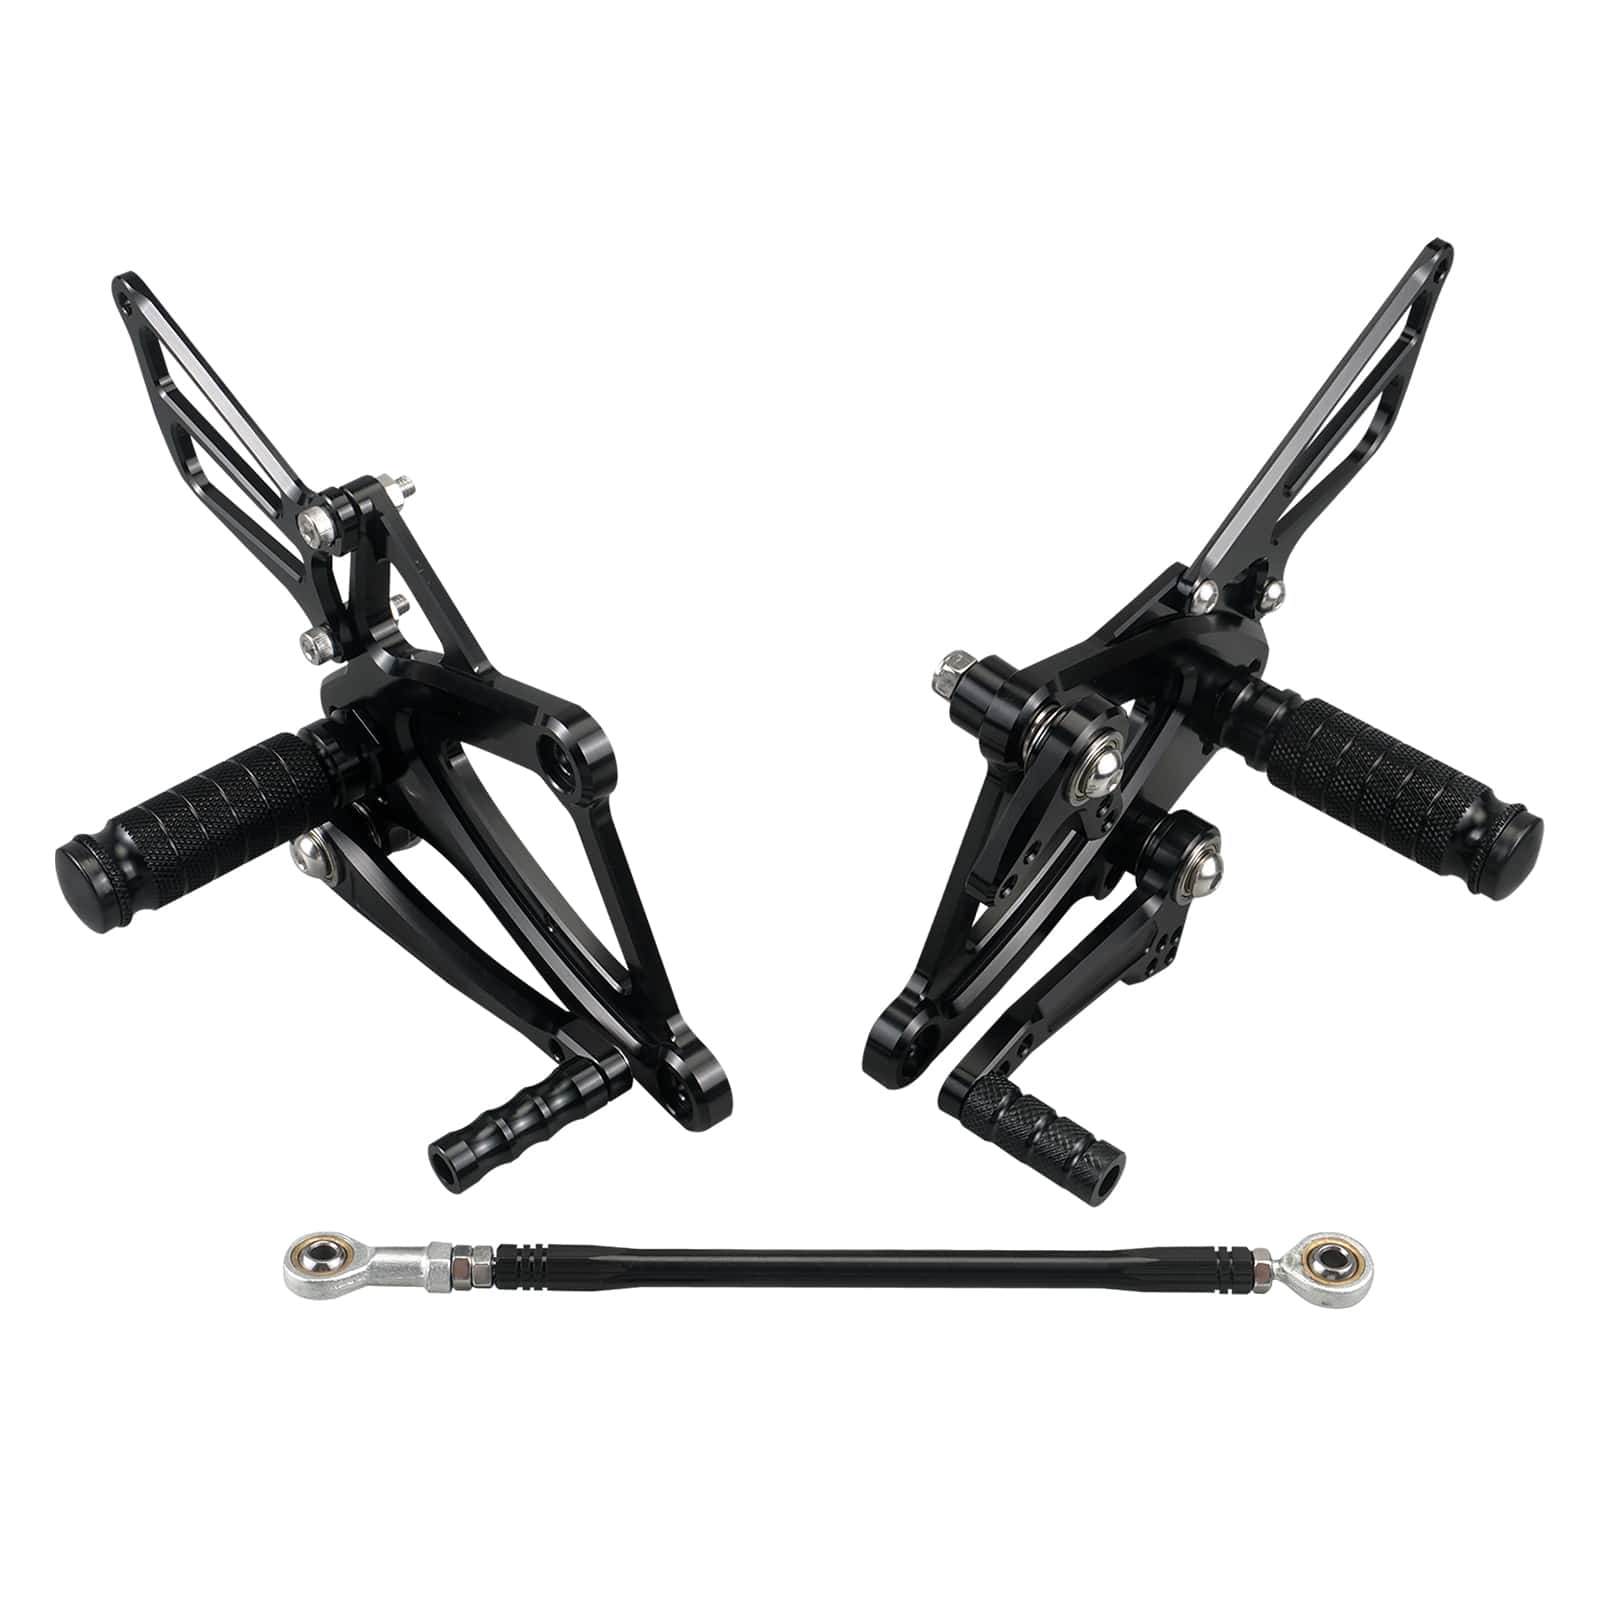 Race Adjustable Rearsets Foot Pegs Pedals For Honda CB 400F 500F / CBR 400R 500R